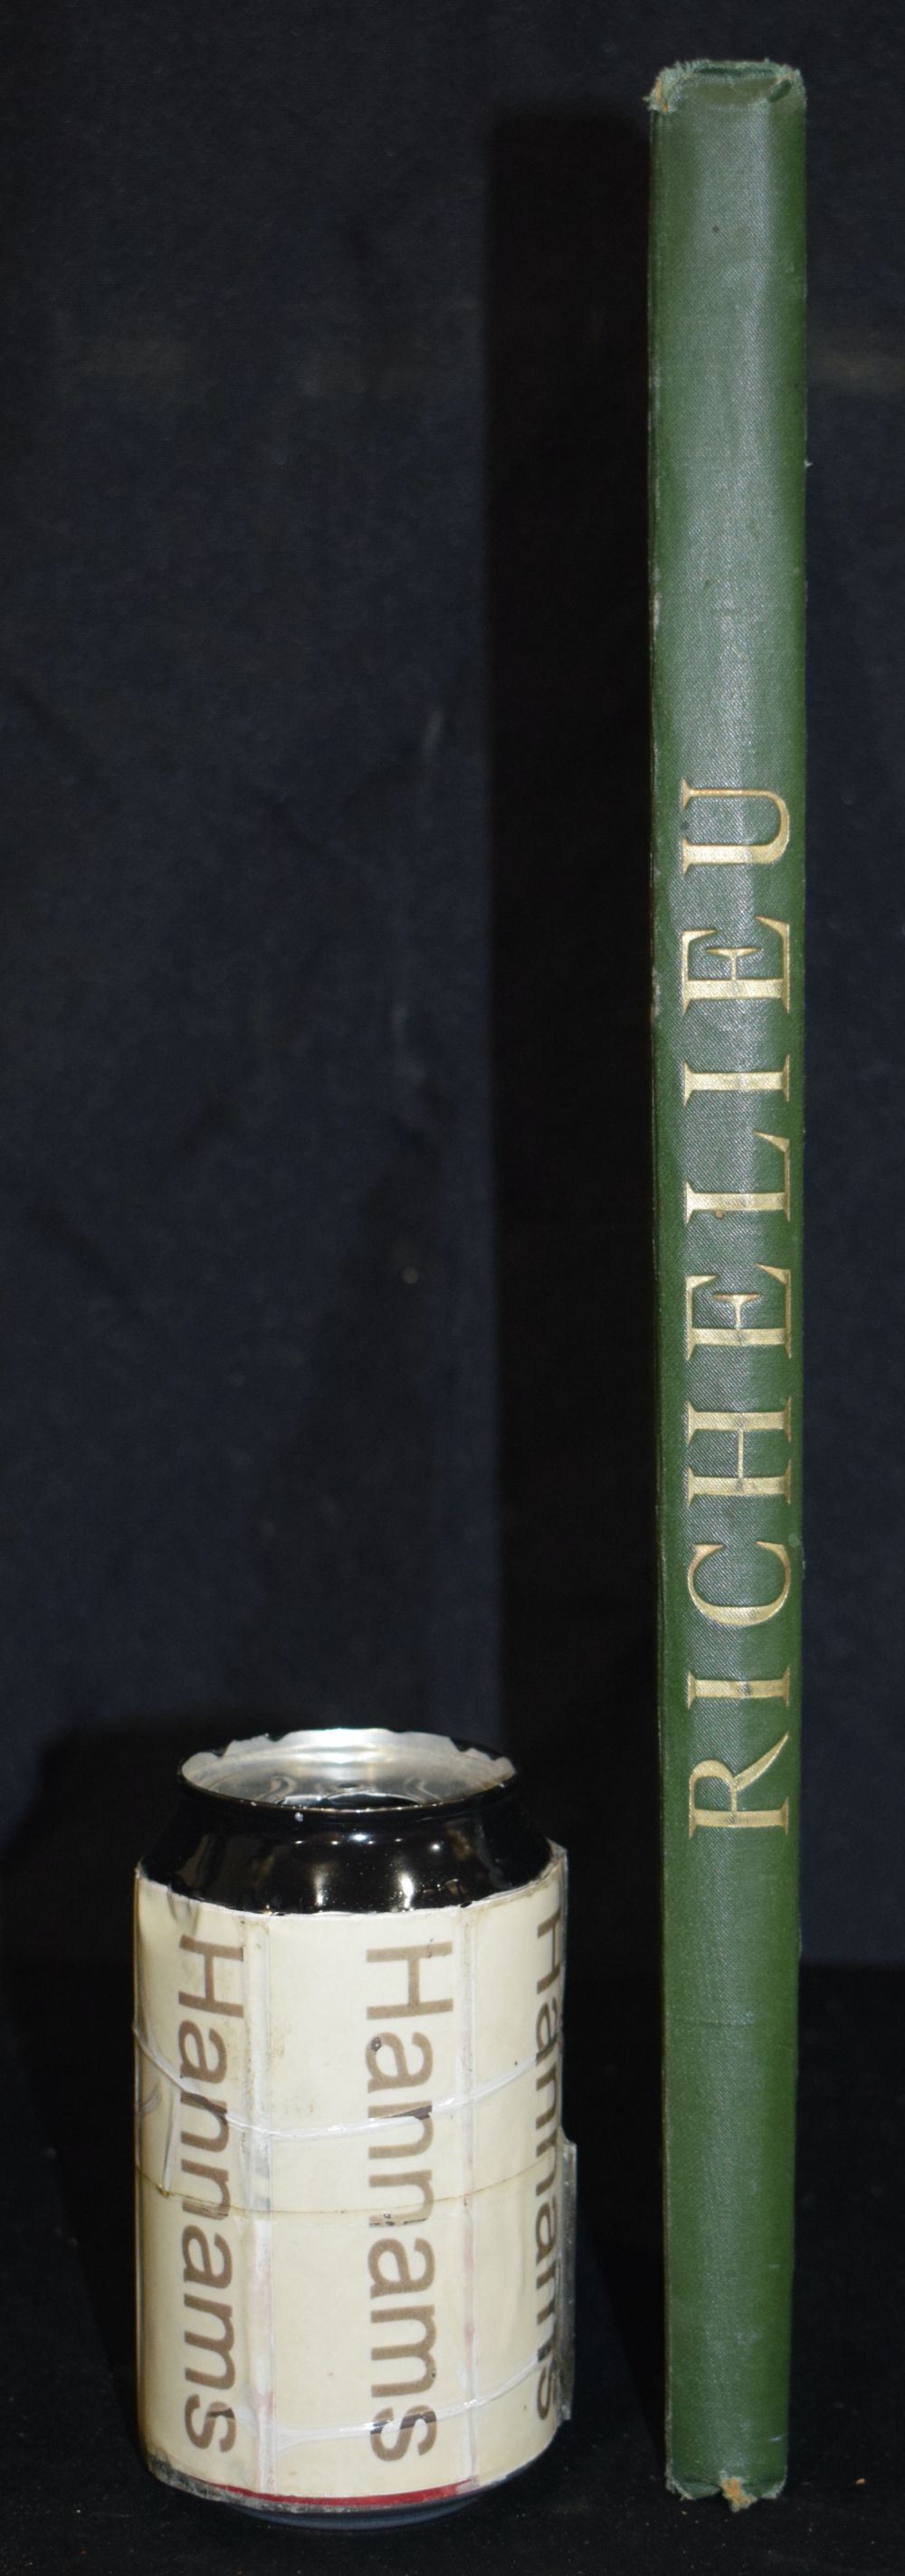 A Rare copy of " Richelieu " by Theodore CAHU , illustrated by Maurice Leloir published by